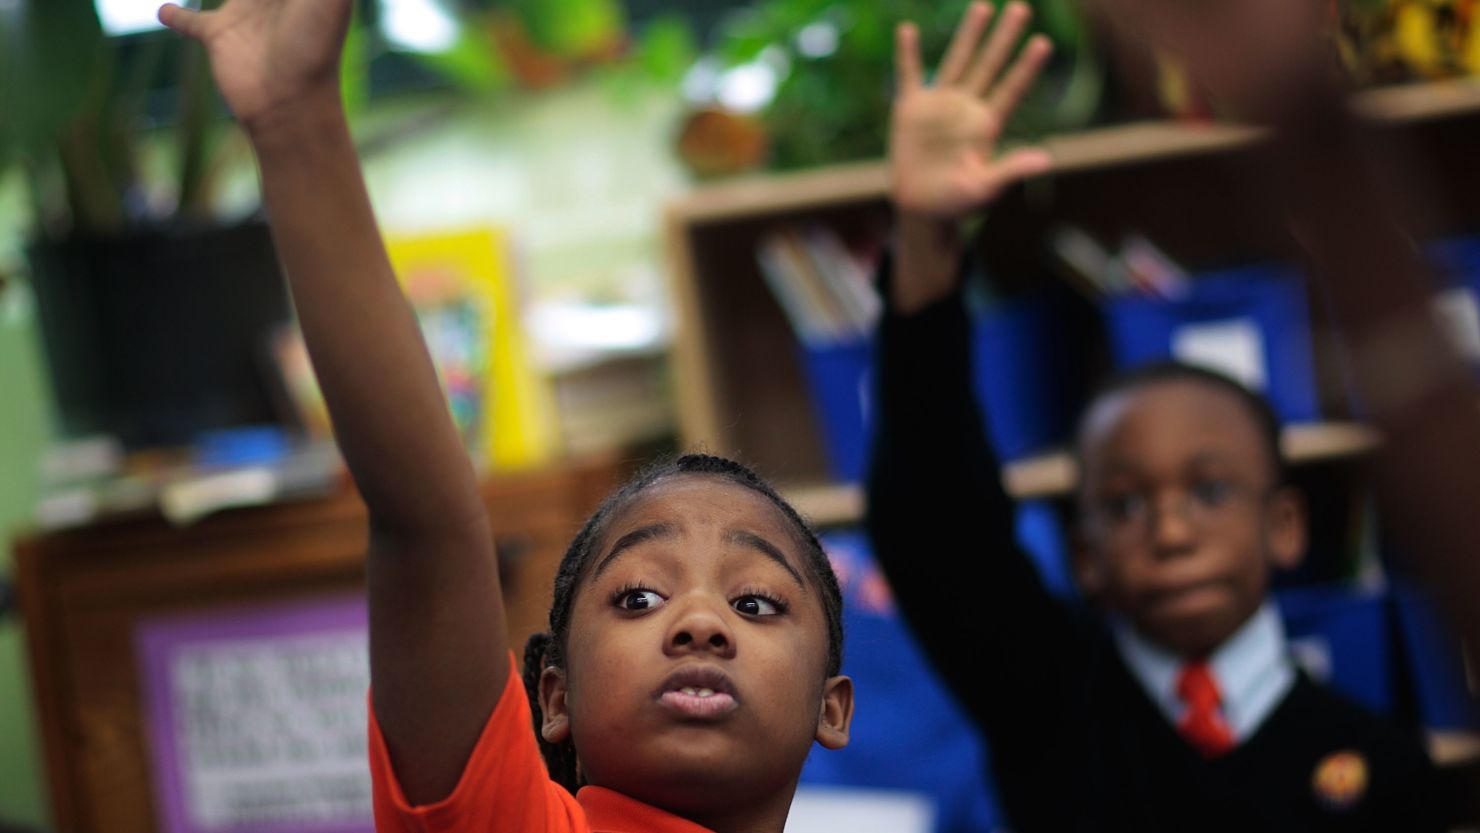 A new bill supports the growth in charter schools, like Harlem Success Academy, a free, public charter school in New York.